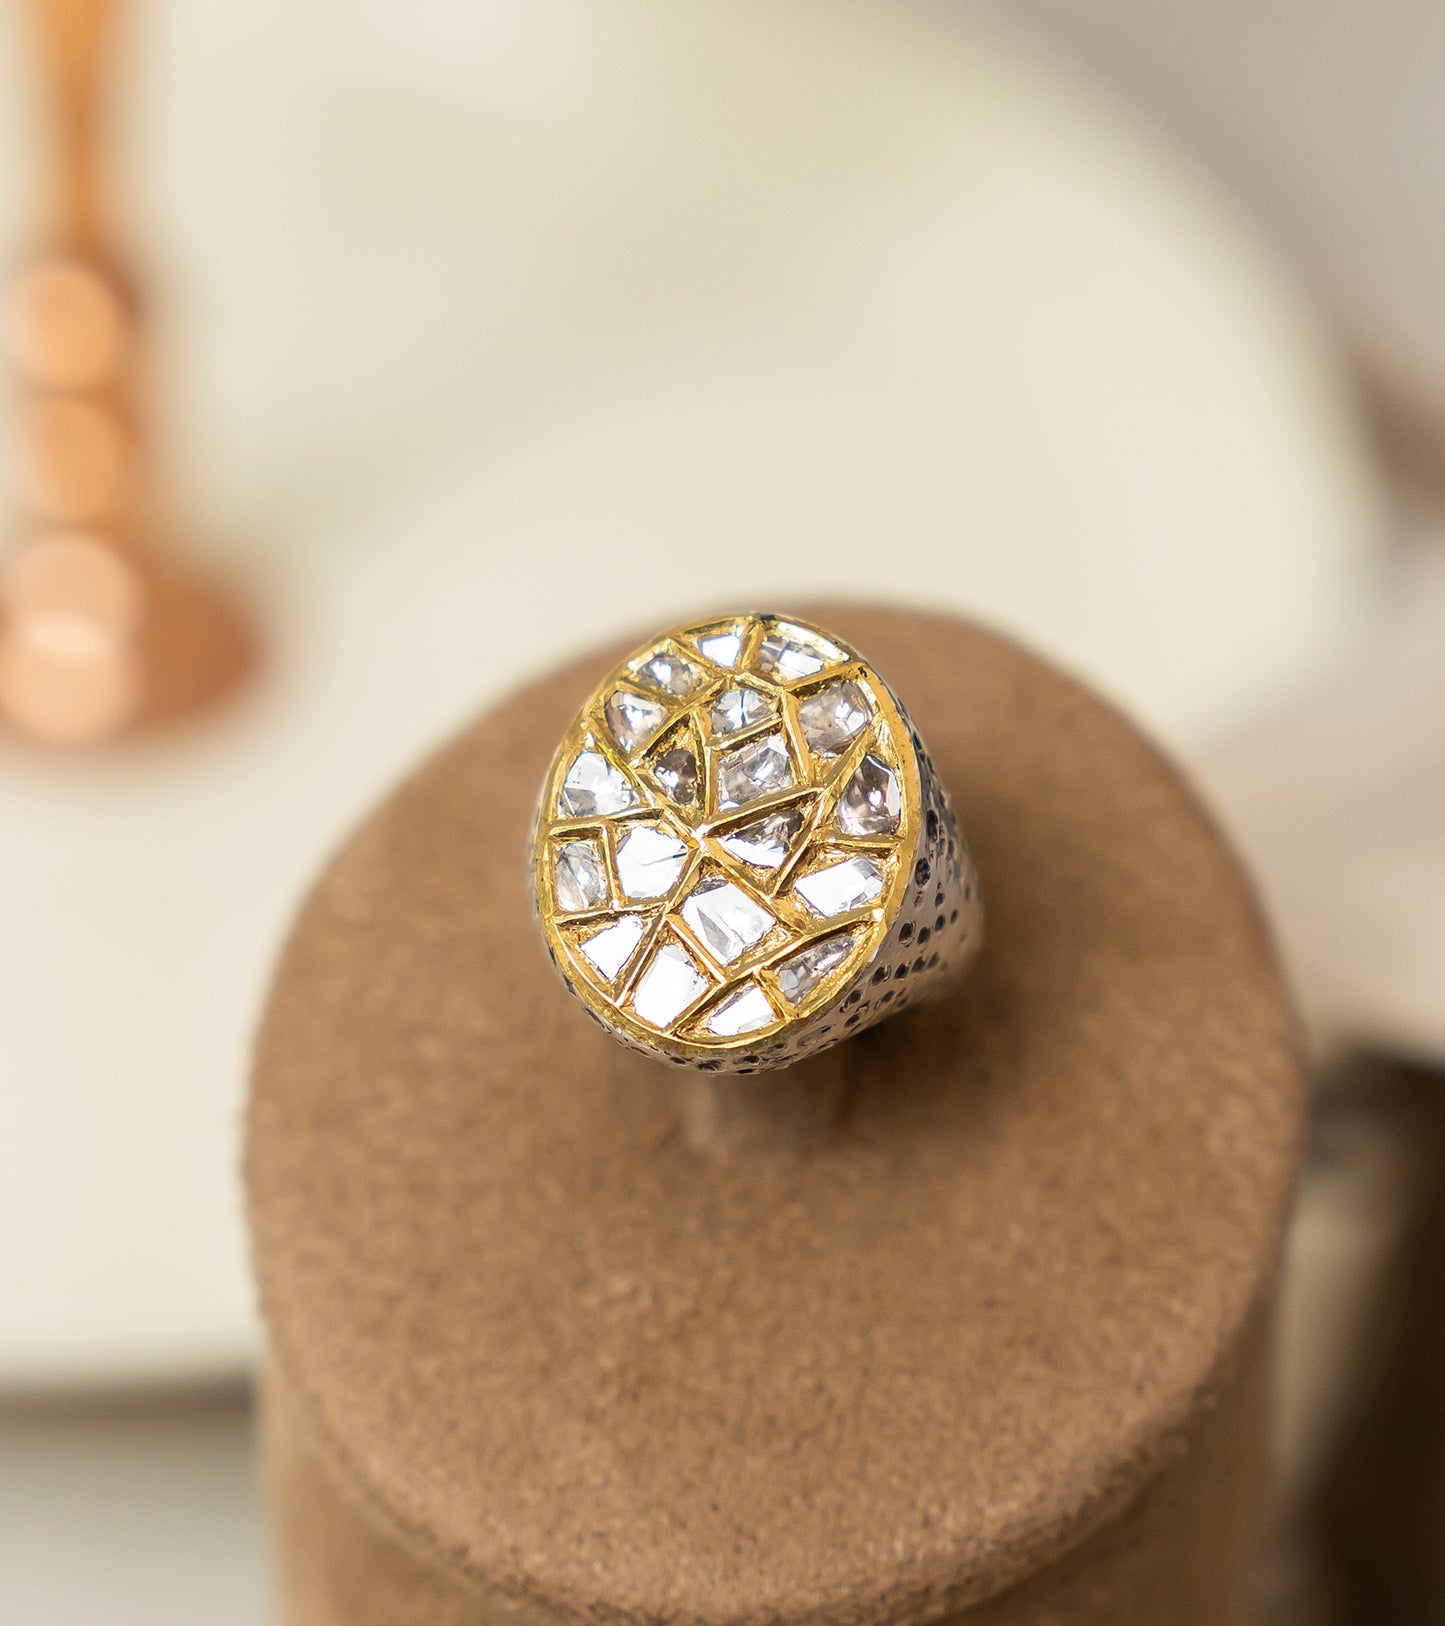 The Oval Cocktail Ring